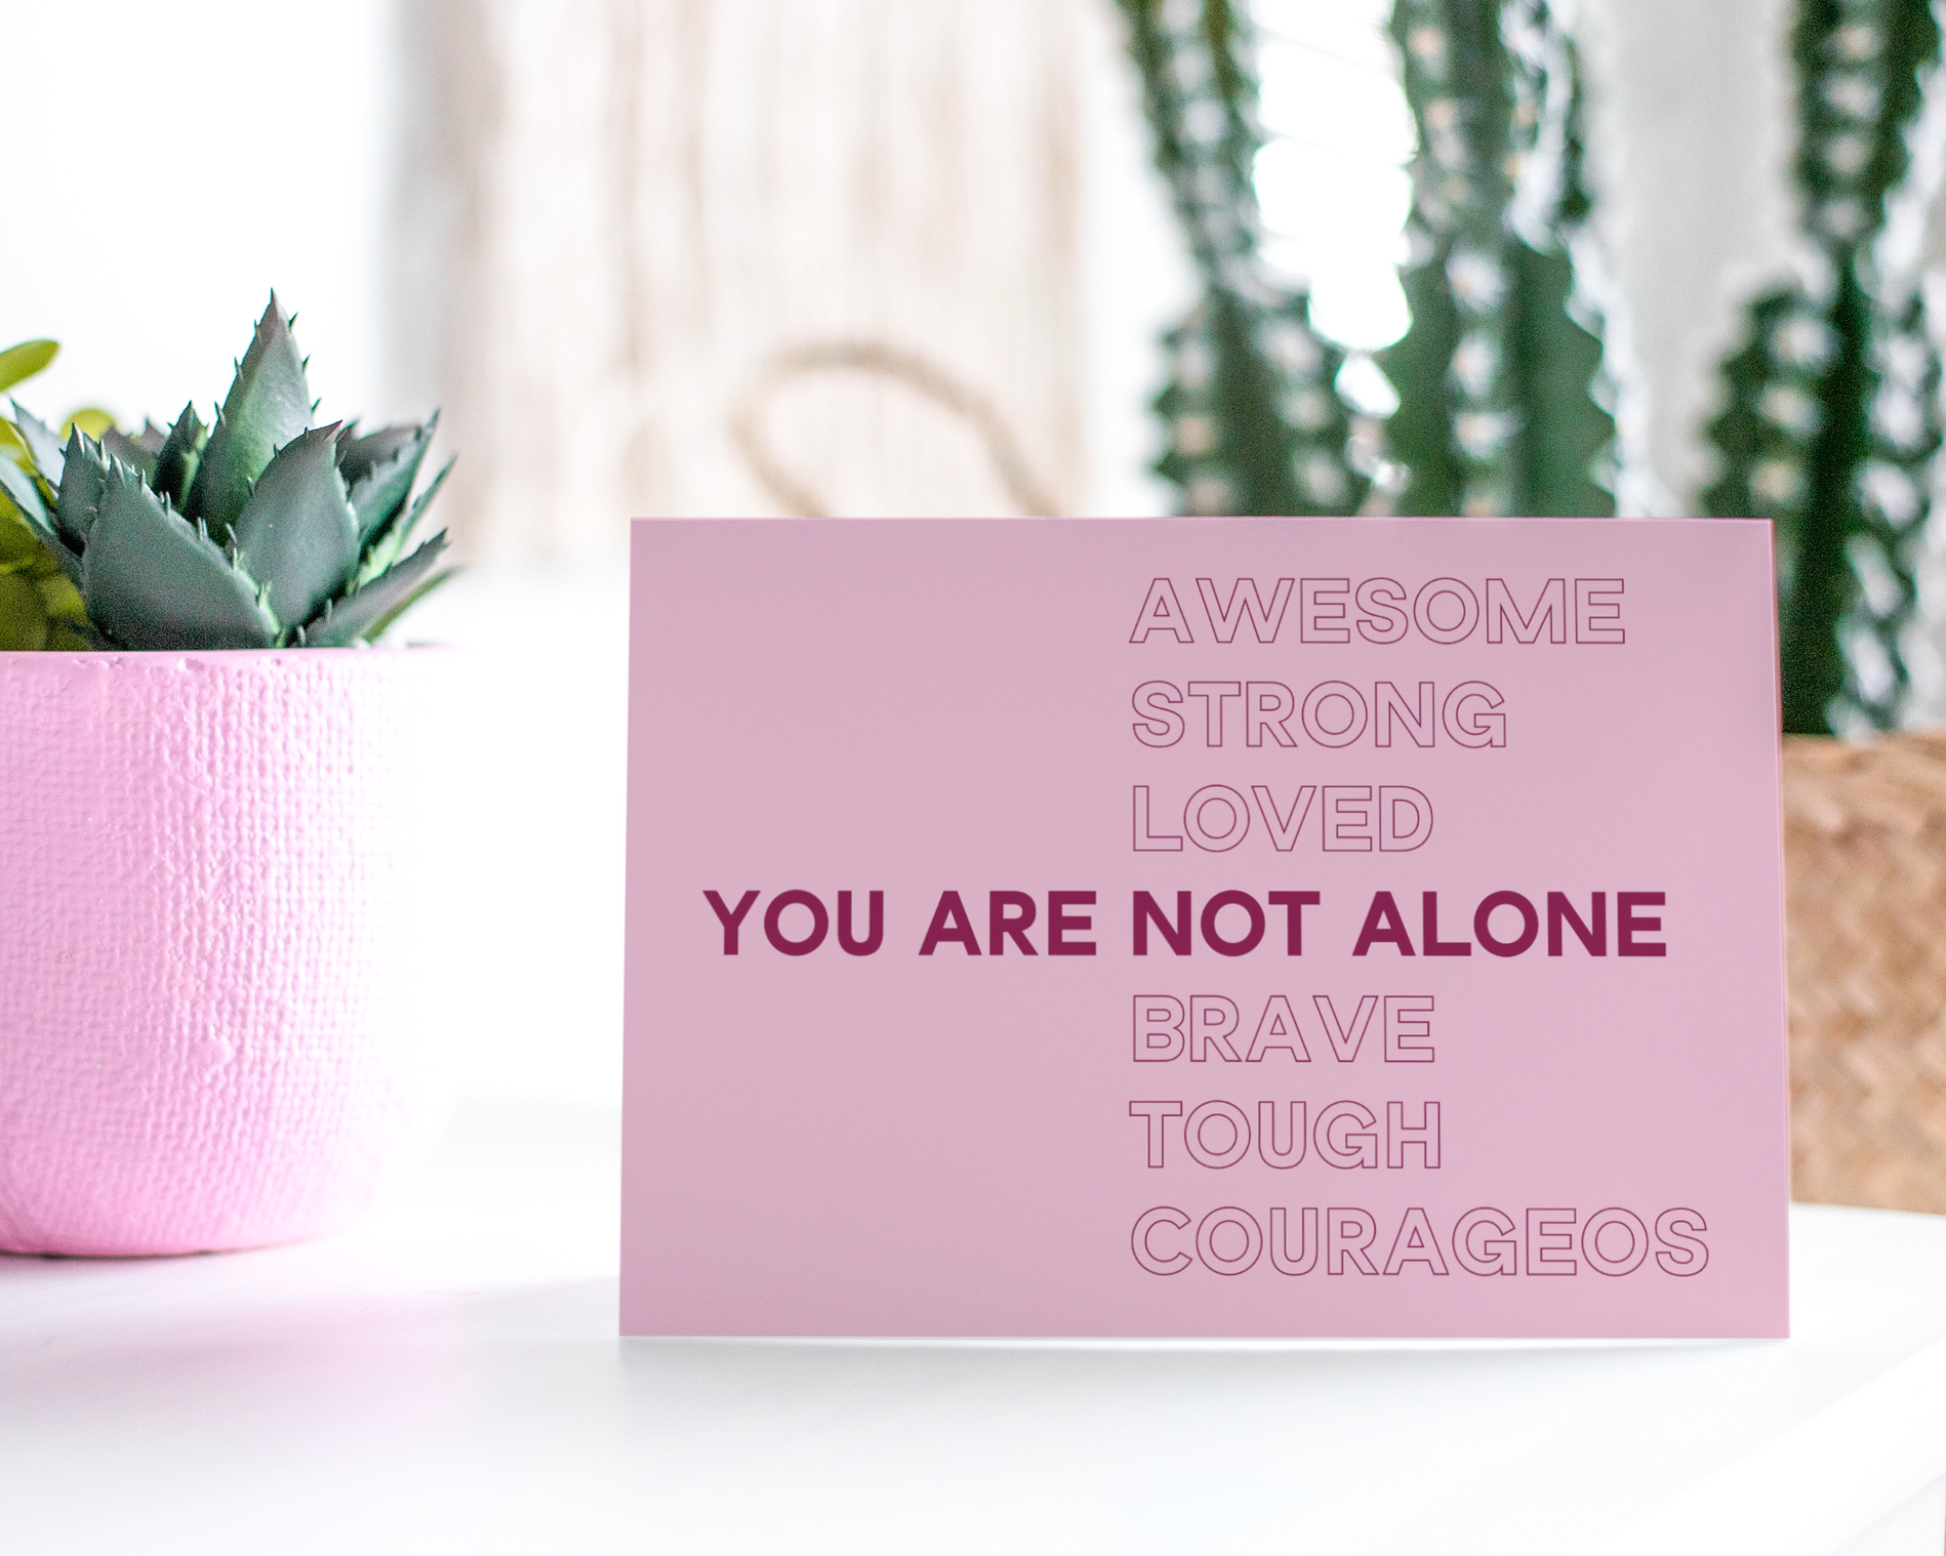 You Are Not Alone.